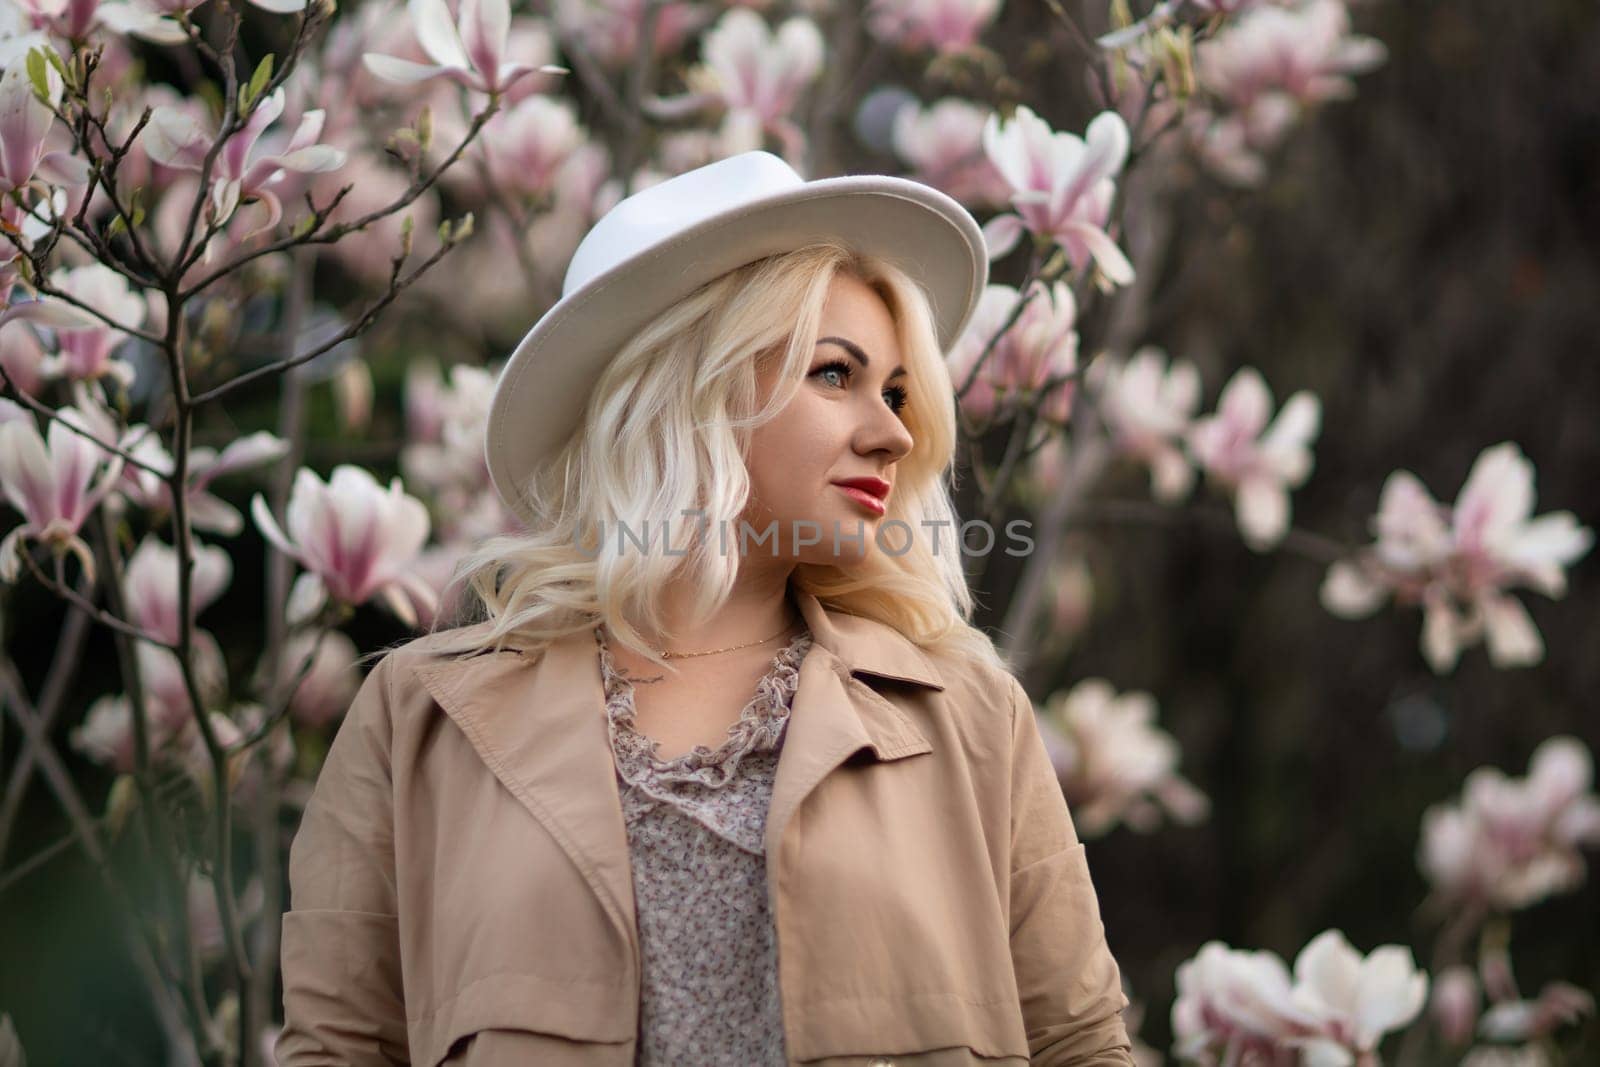 A blonde woman wearing a white hat stands in front of a tree with pink flowers by Matiunina